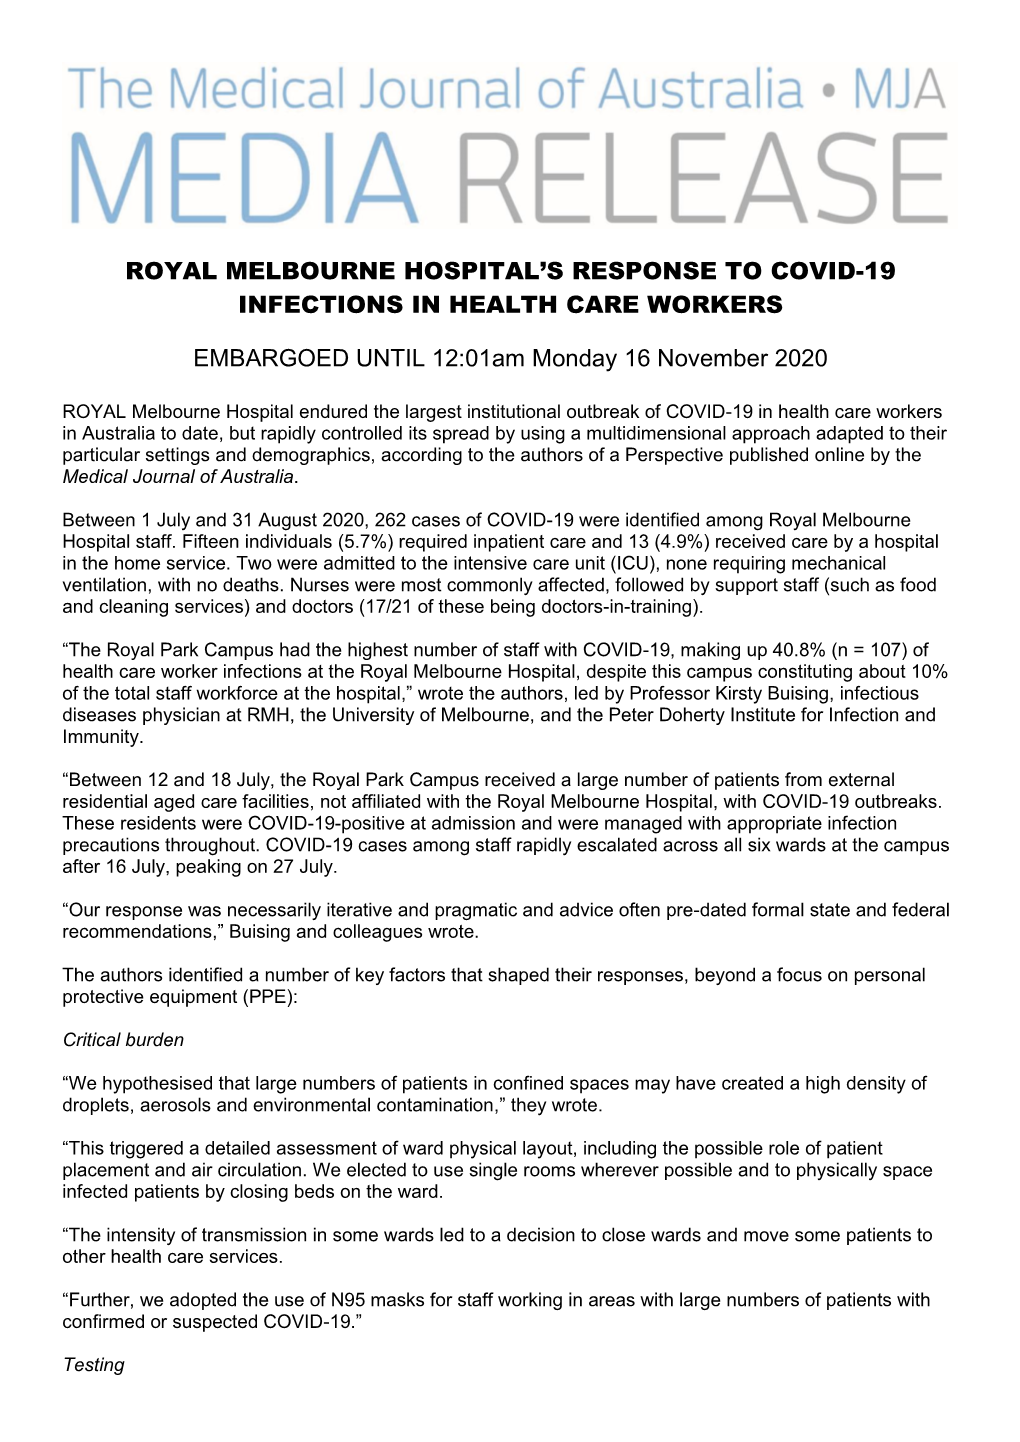 Royal Melbourne Hospital's Response to Covid-19